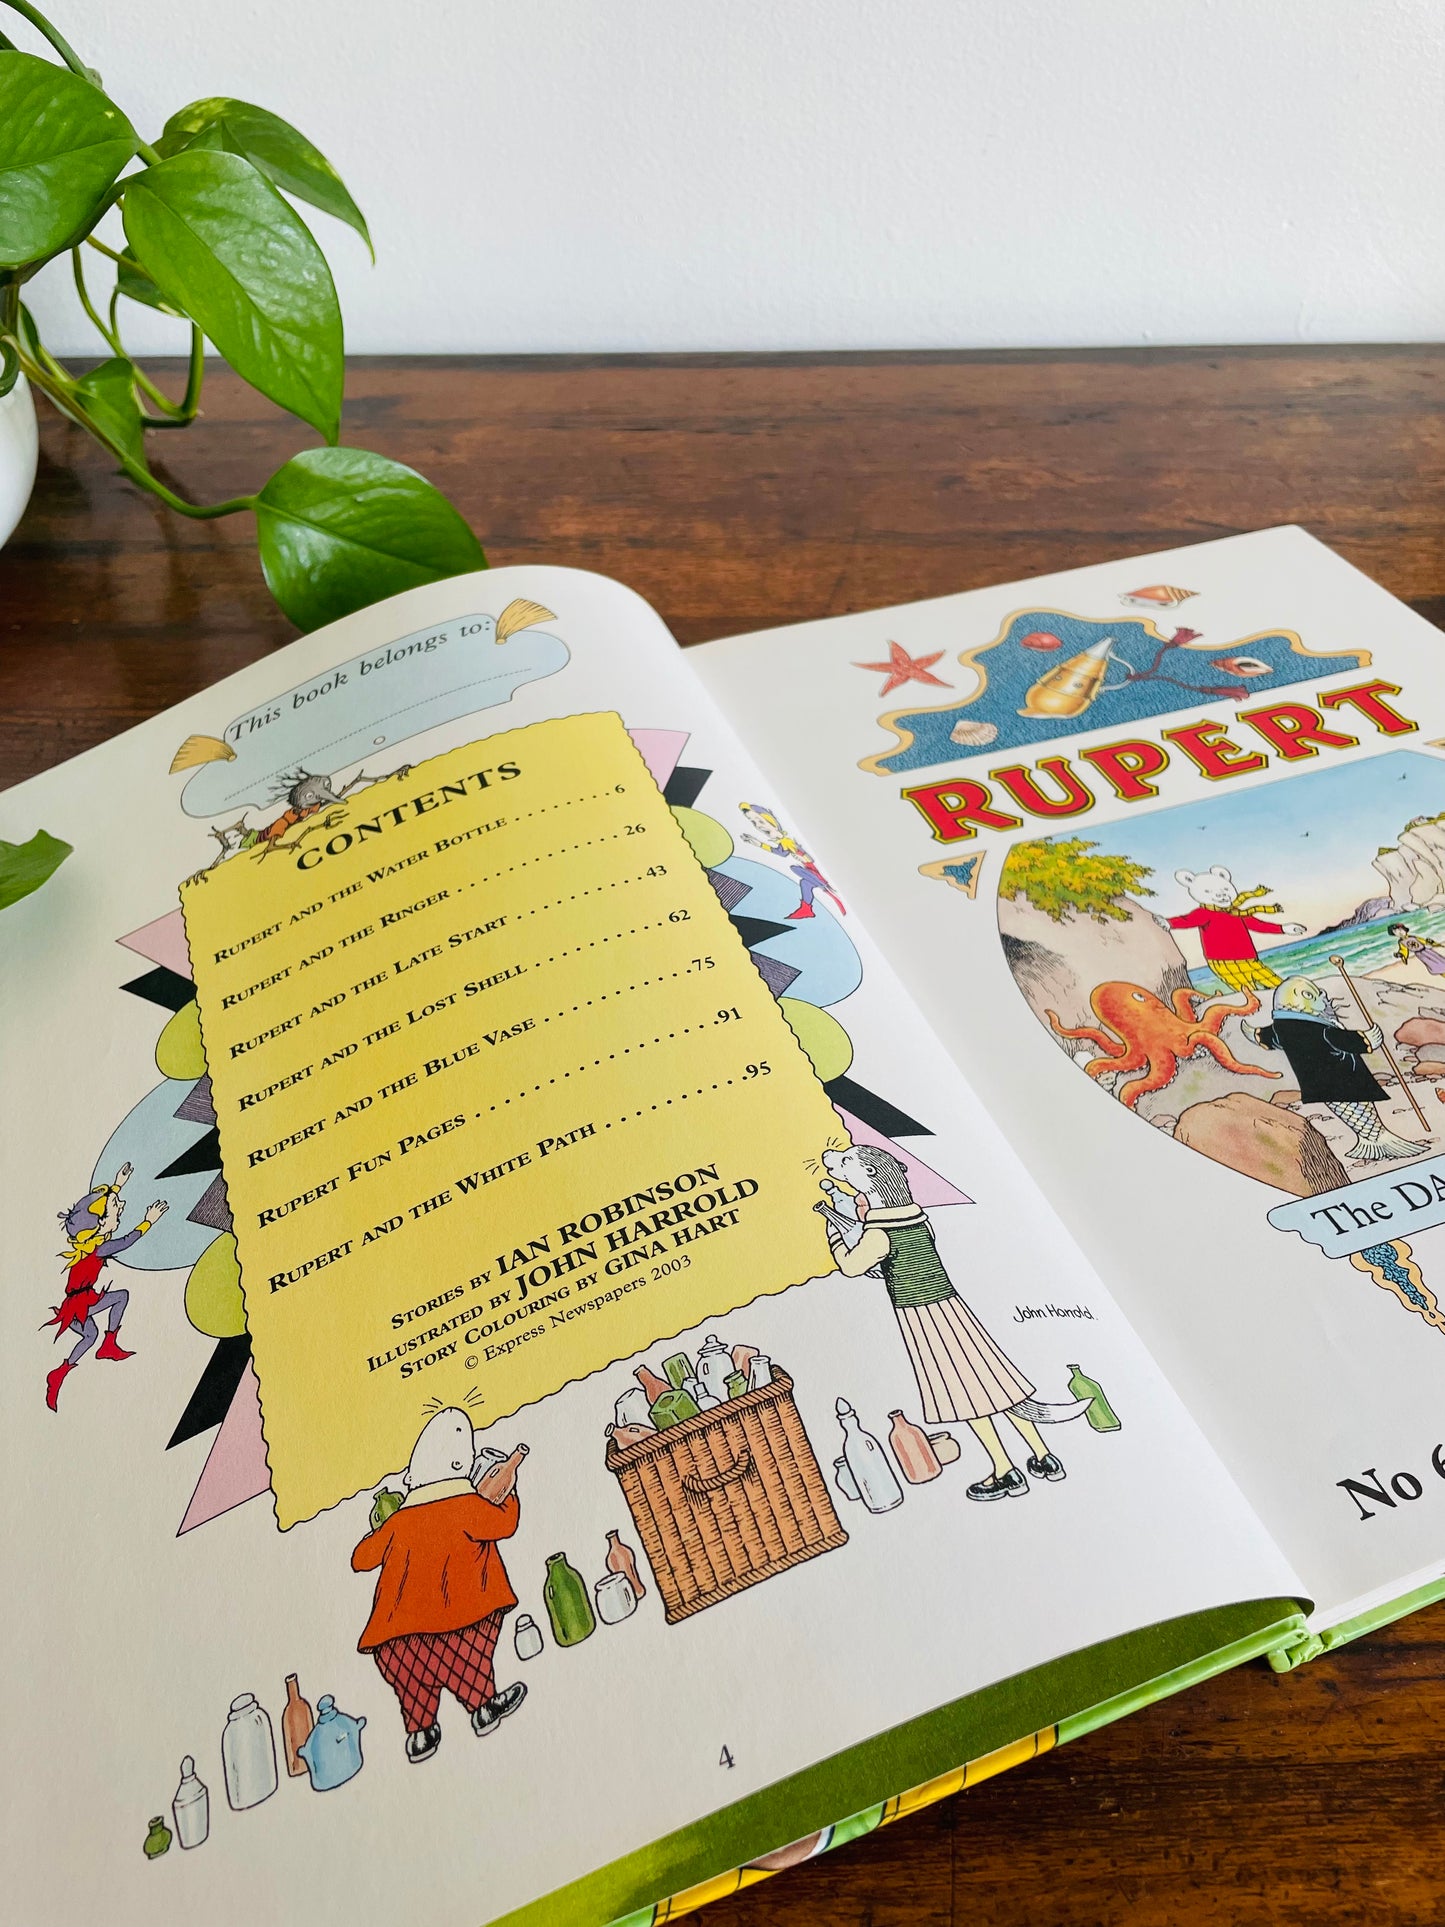 The Rupert Annual (2003) - Hardcover Book